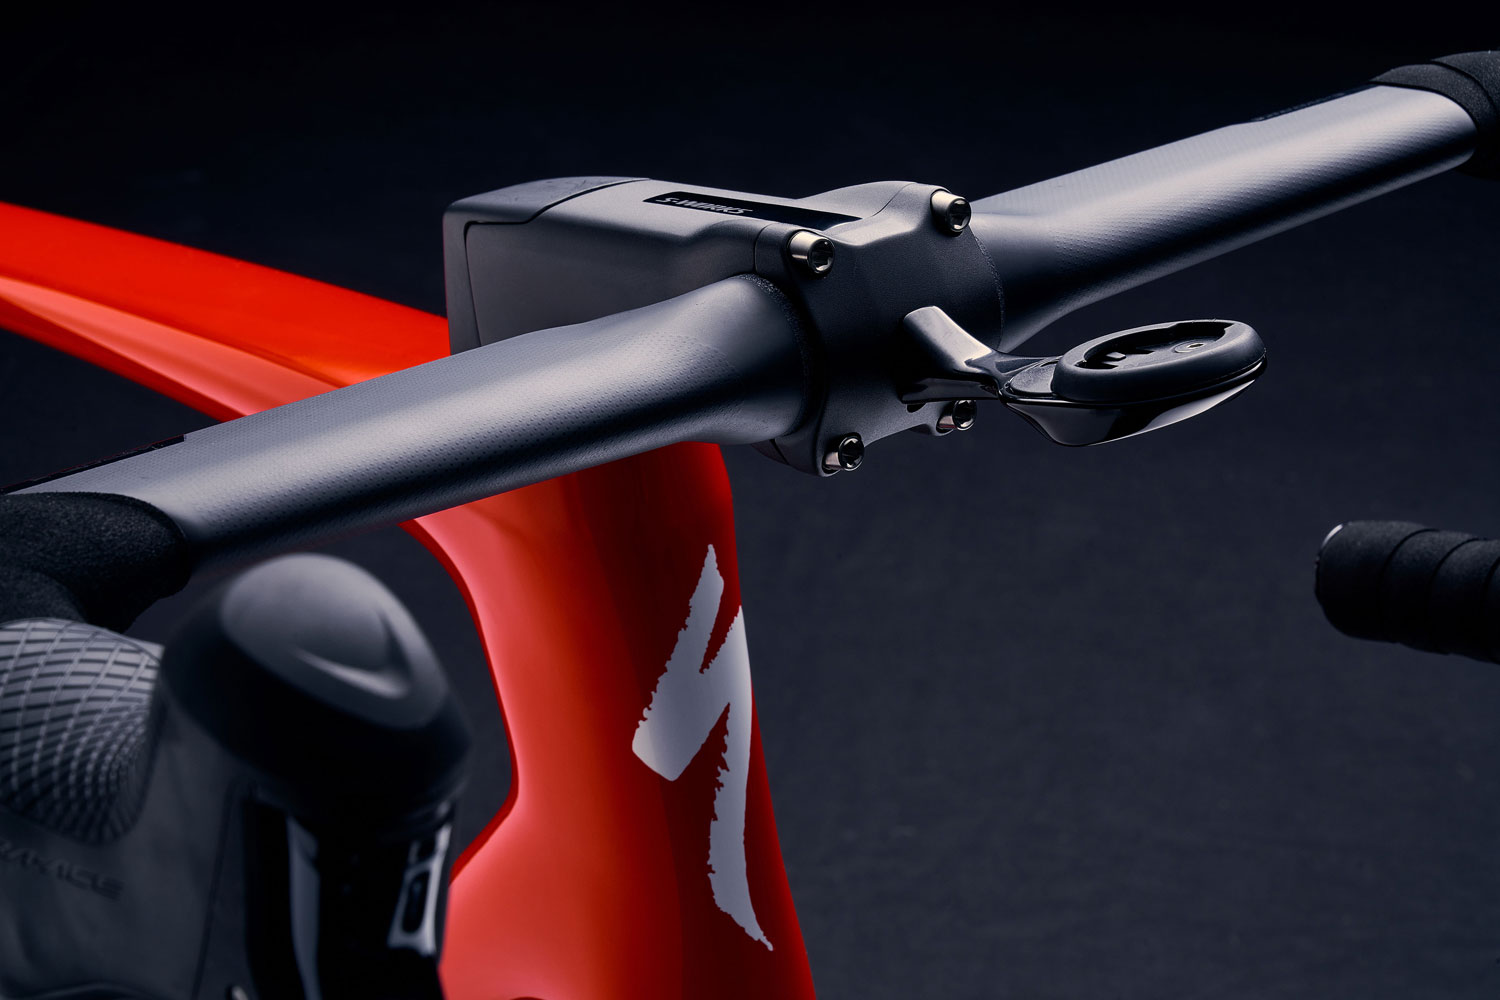 First Look At The Specialized Tarmac SL7 Road Bike